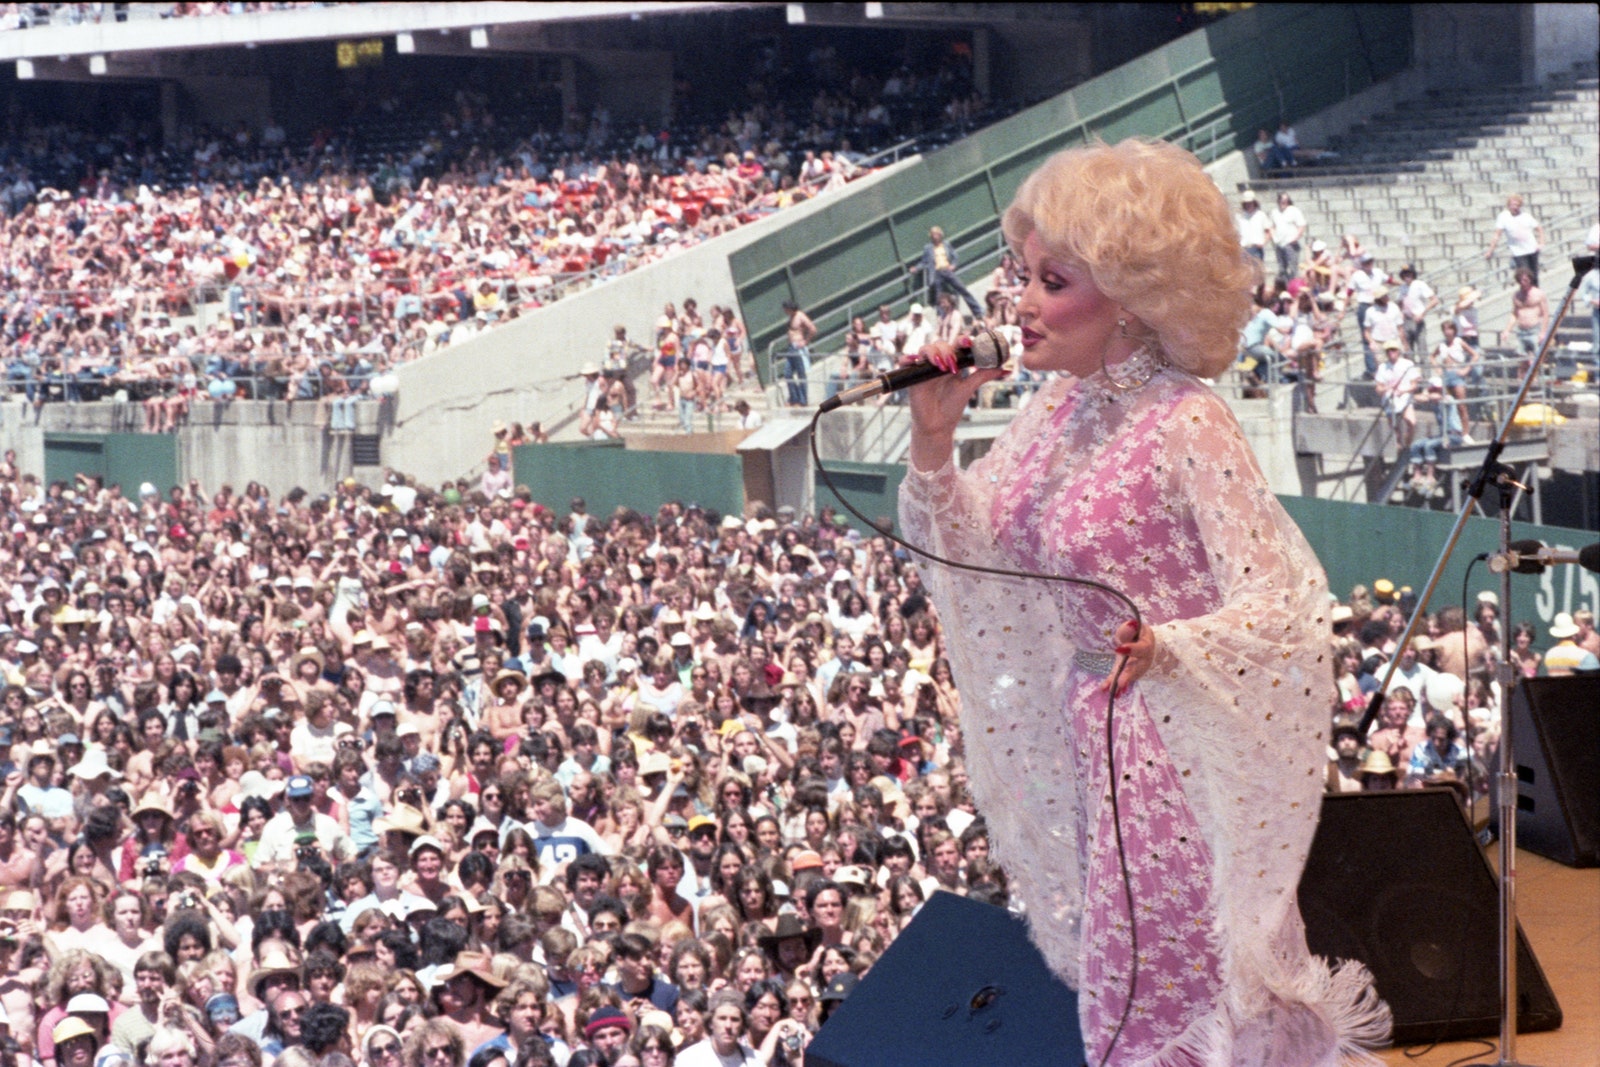 Dolly Parton performing at a packed outdoor concert.